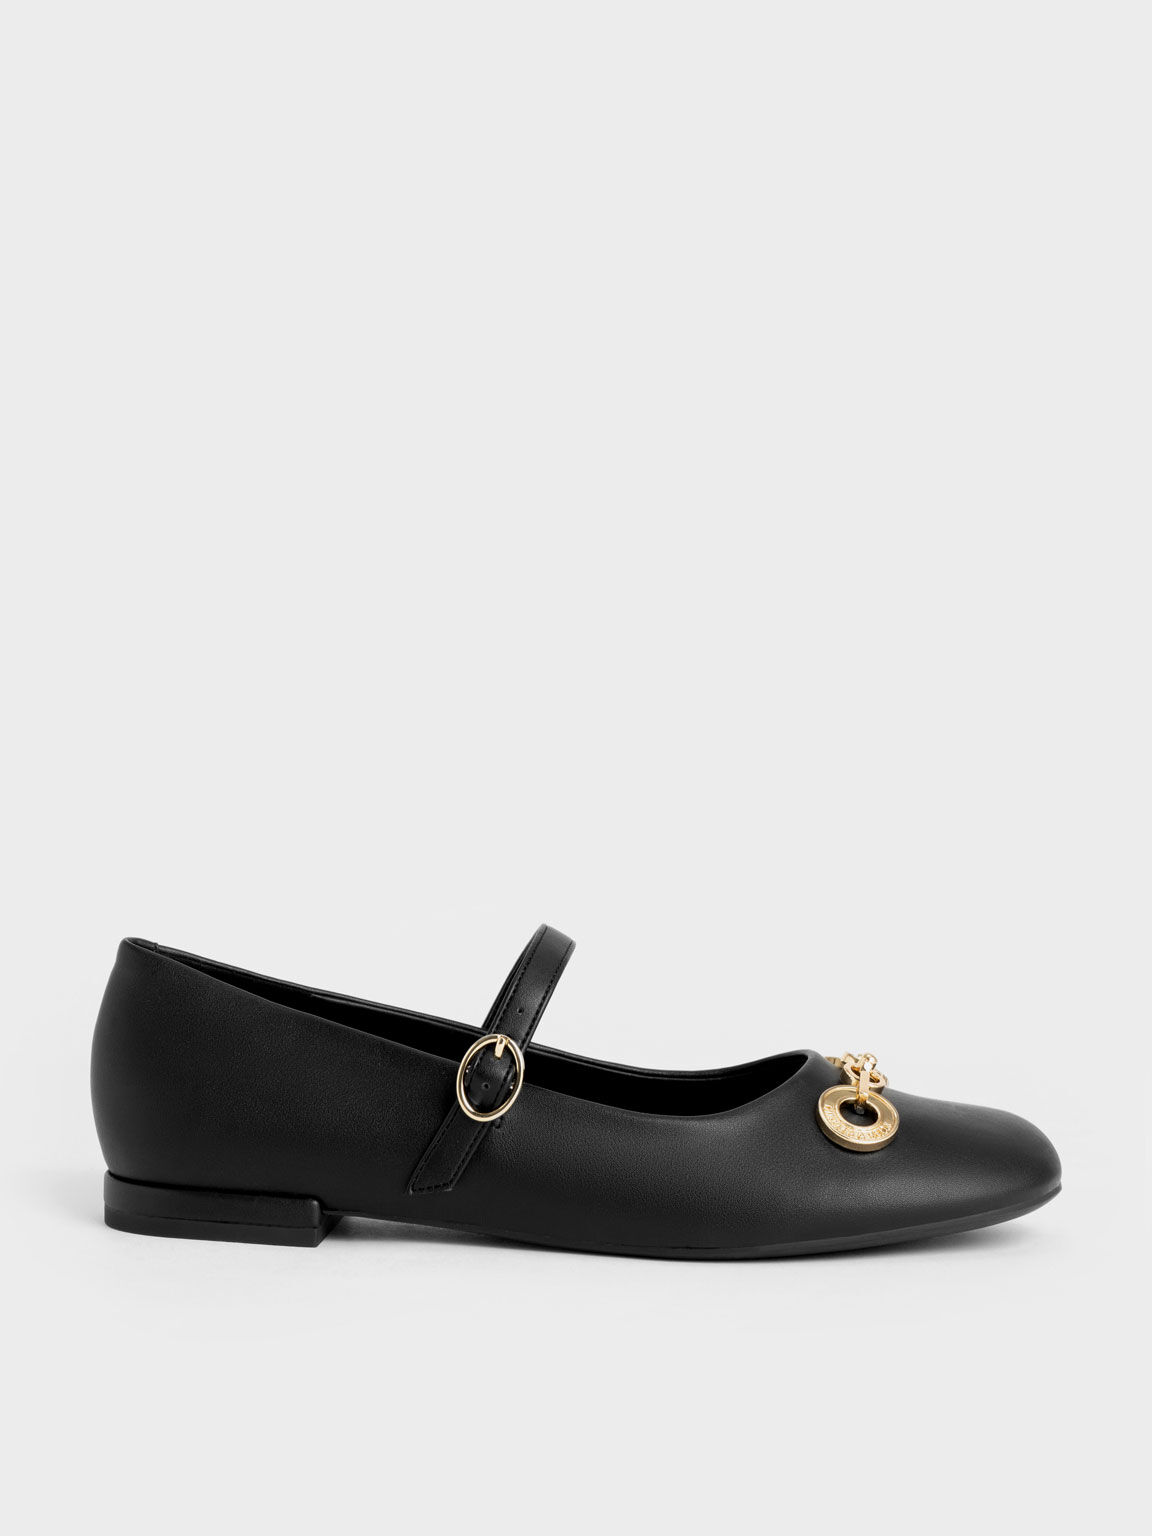 Black Circle Chain-Link Mary Janes - CHARLES & KEITH SG